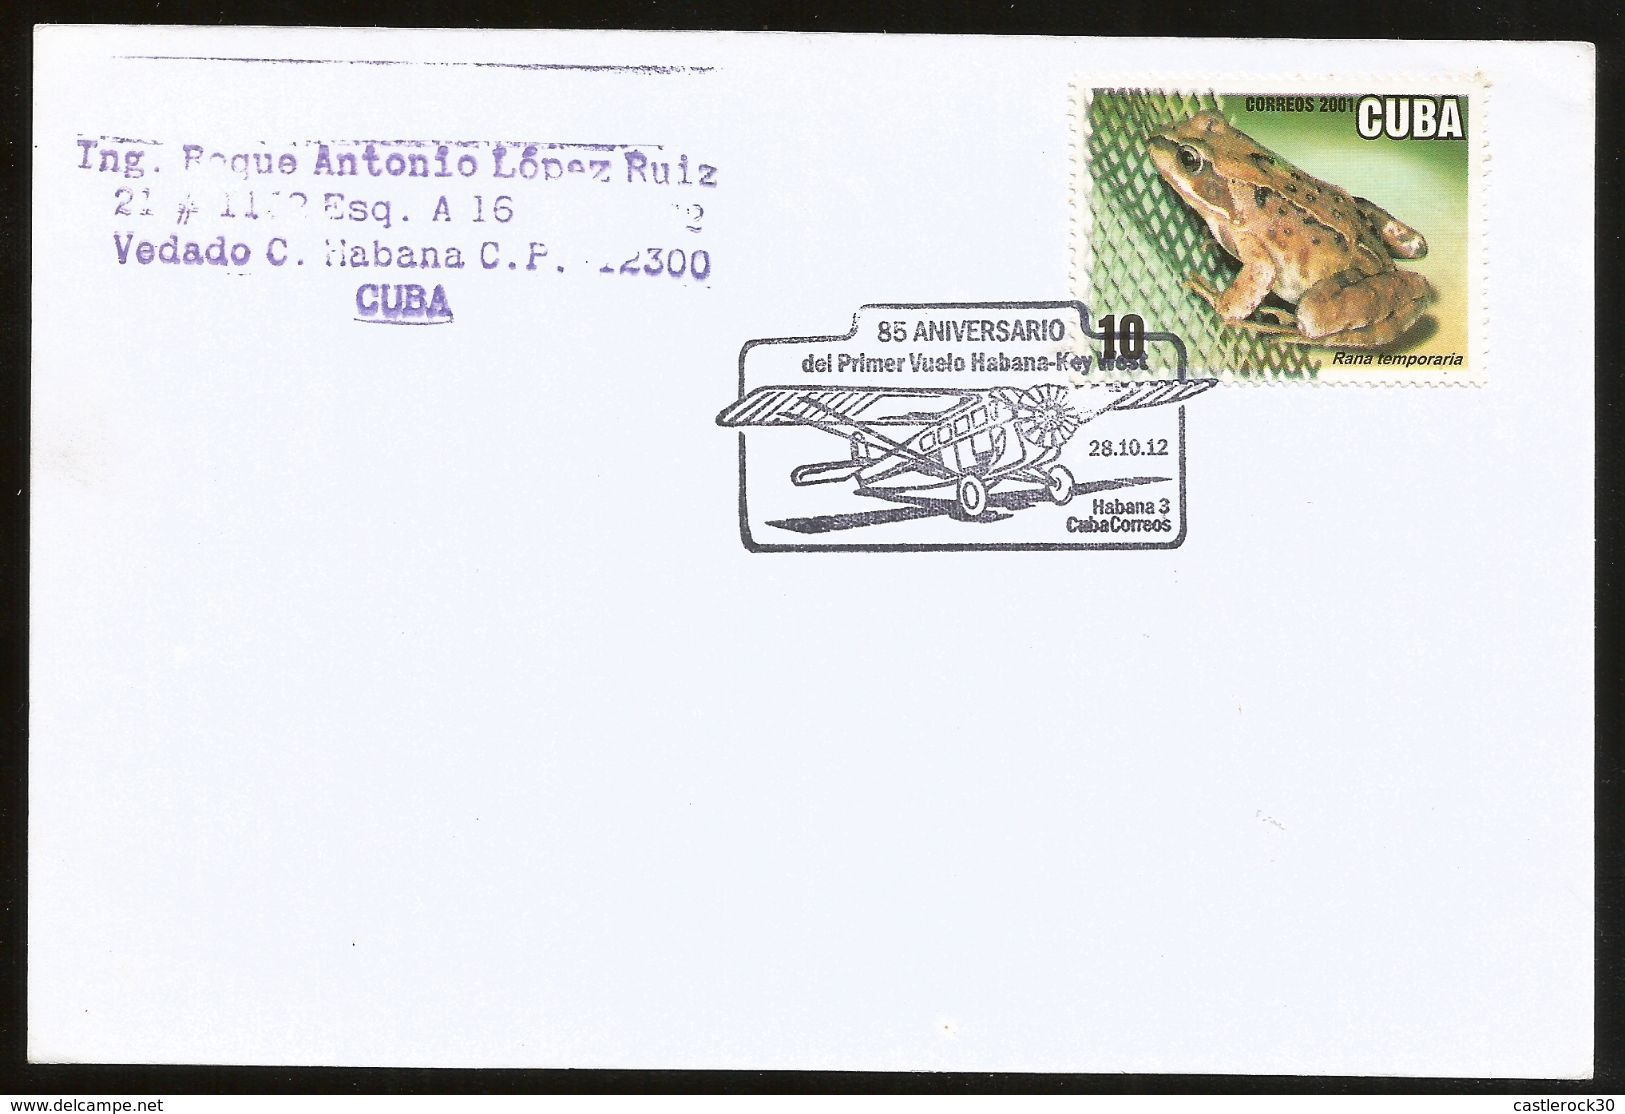 J) 2012 CUBA-CARIBE, 85TH ANNIVERSARY OF THE FIRST FLIGHT HAVANA, TEMPORARY FROG, AIRPLANE, SOUVENIR CARD - Covers & Documents